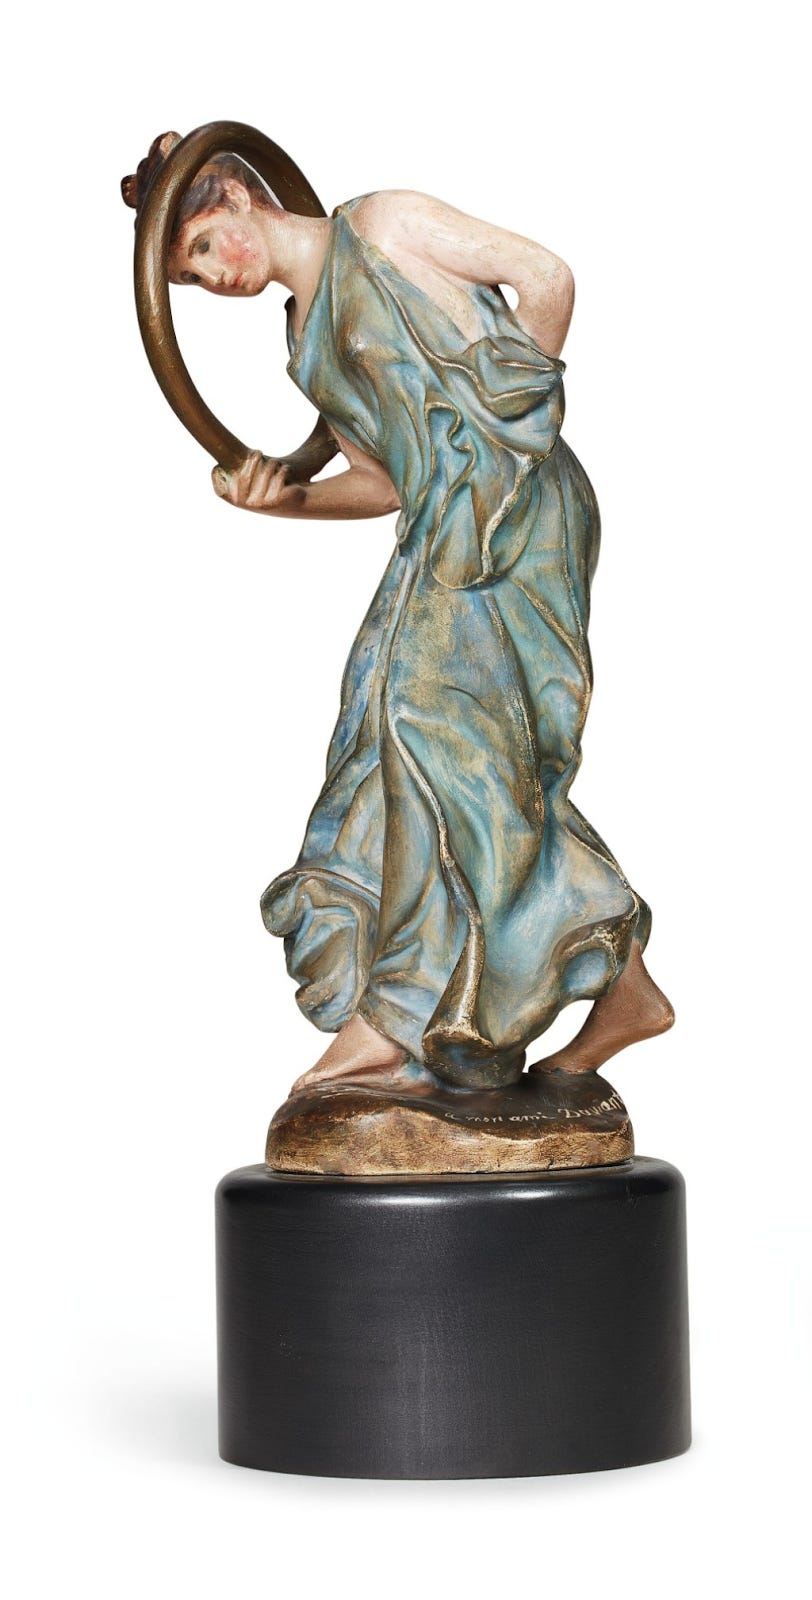 a statue of a girl in a robe holding a hoop around her neck